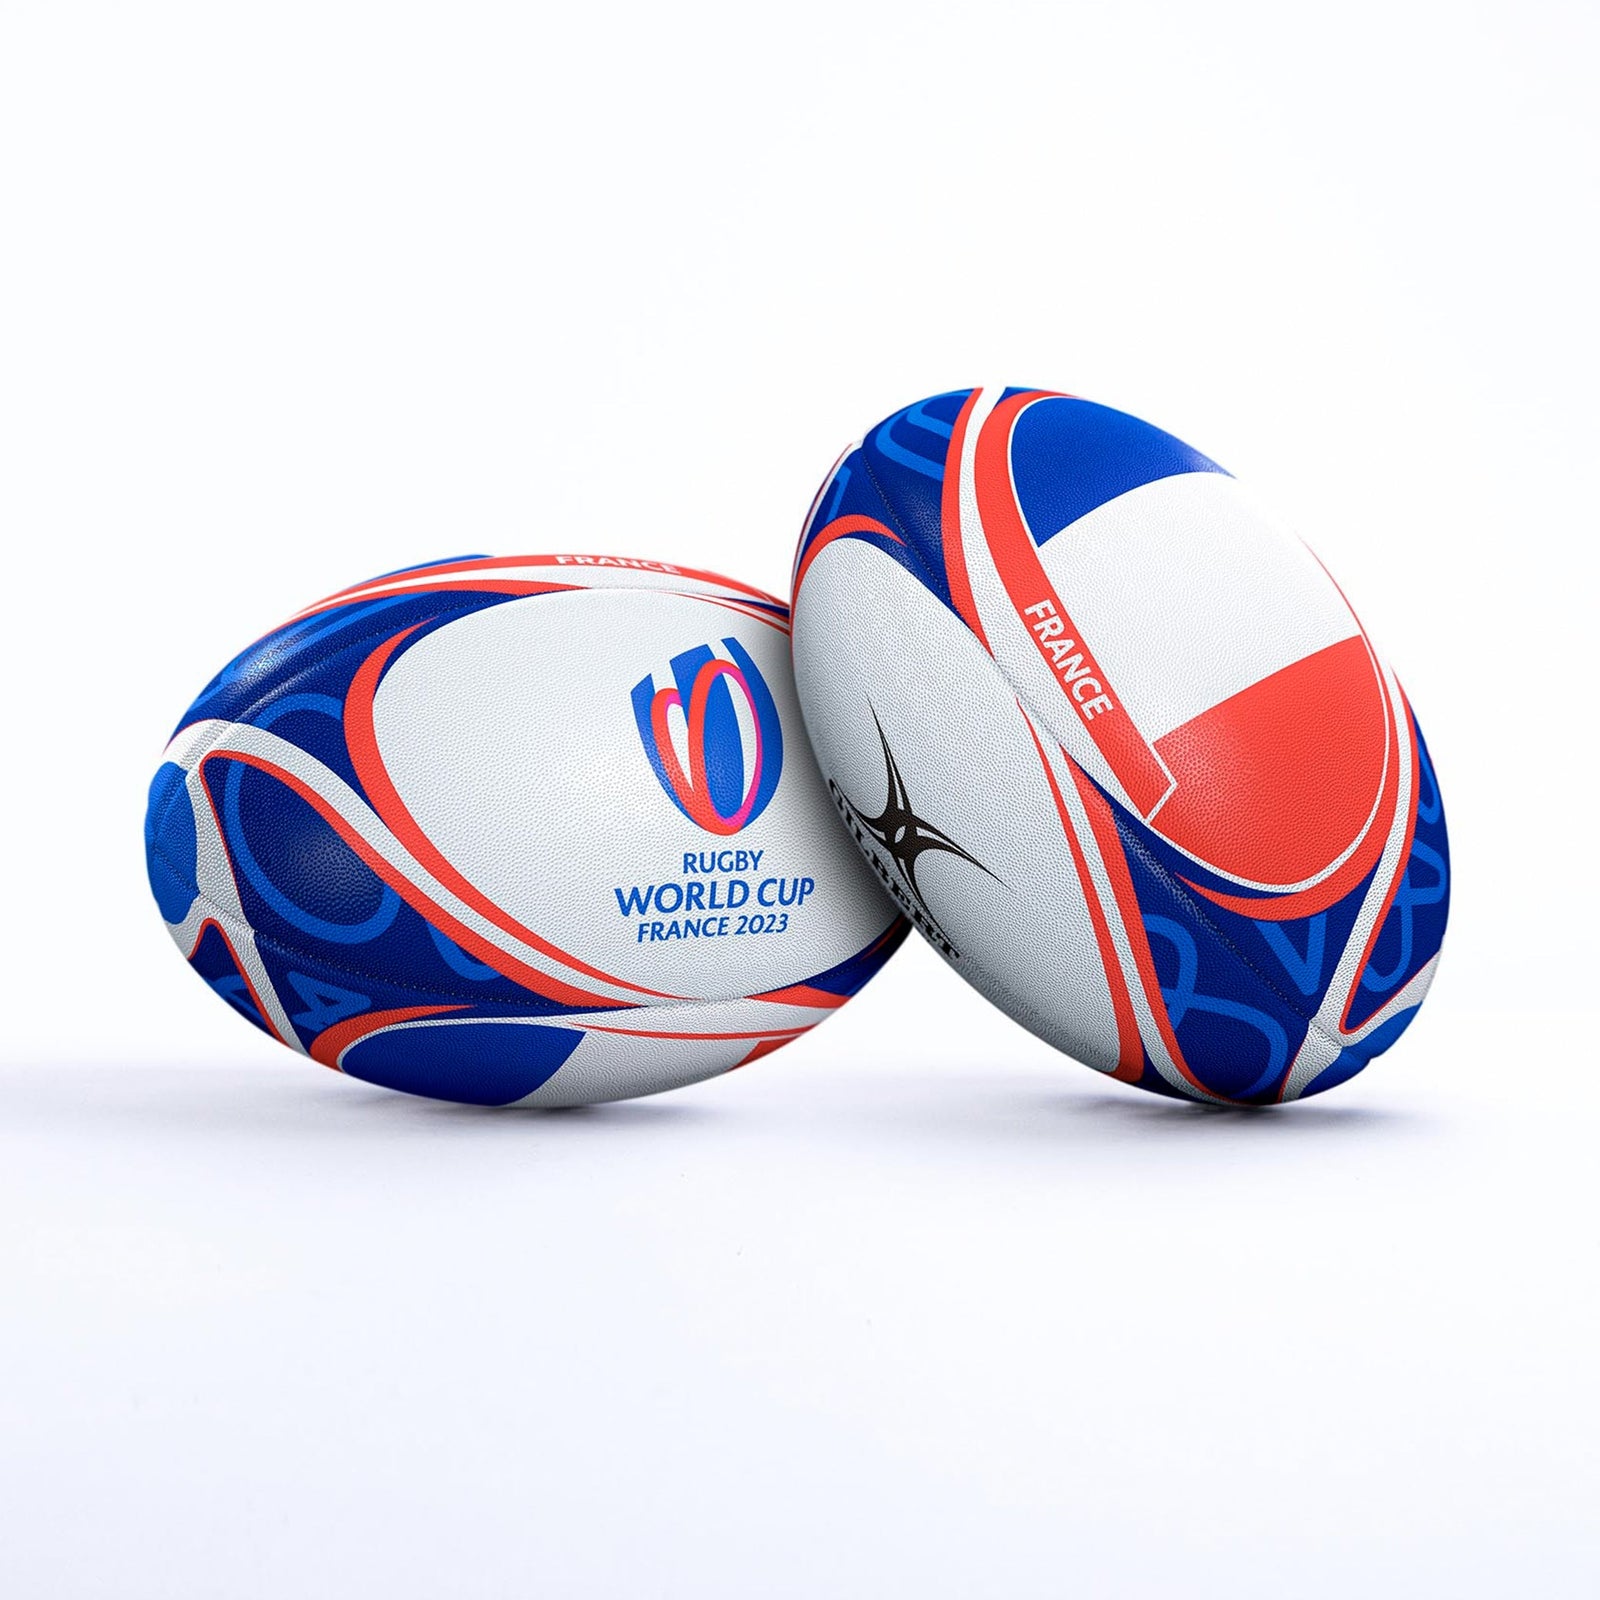 Ballon de rugby France Match Sirius - France - VI Nations - Nations